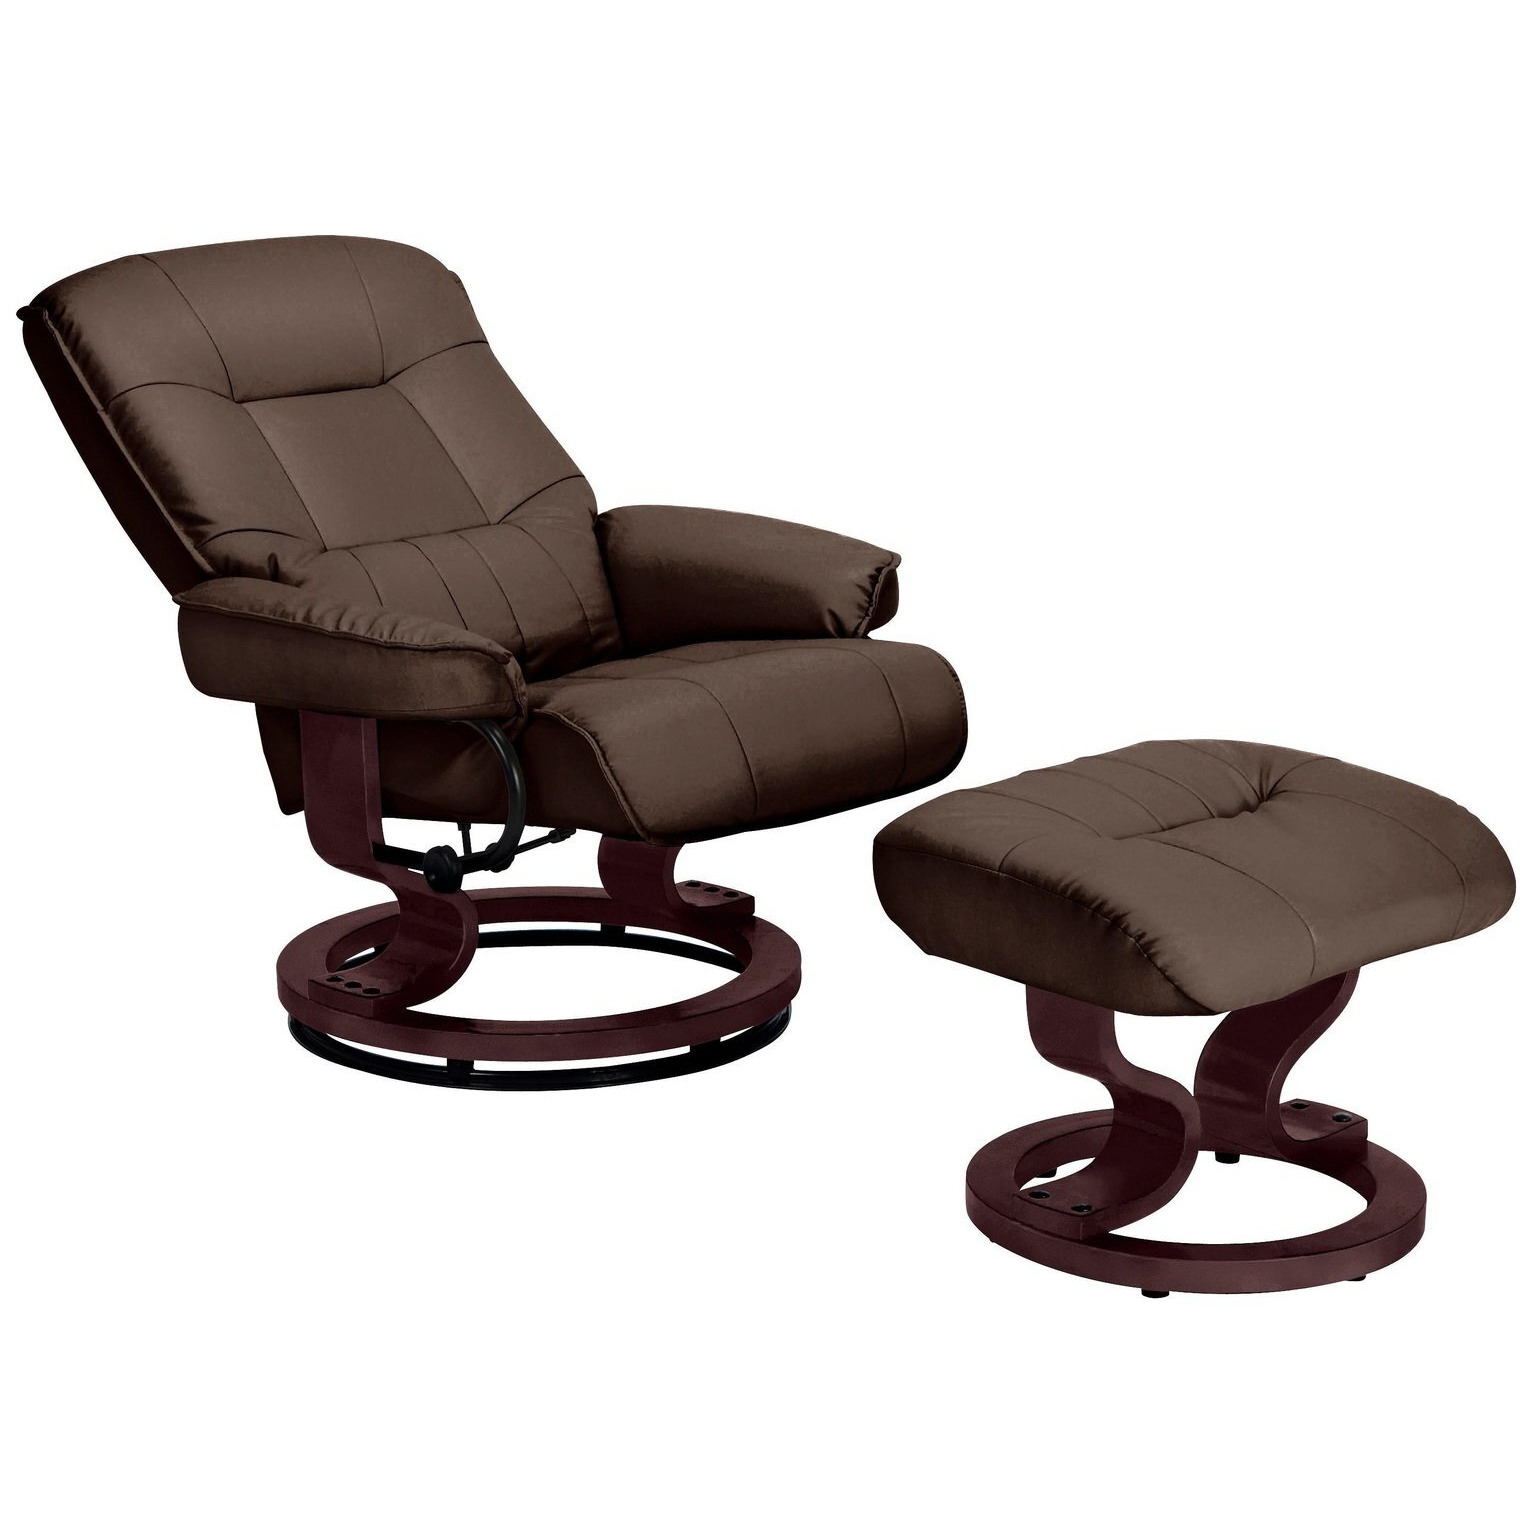 Argos Home Santos Recliner Chair with Footstool - Chocolate - image 1